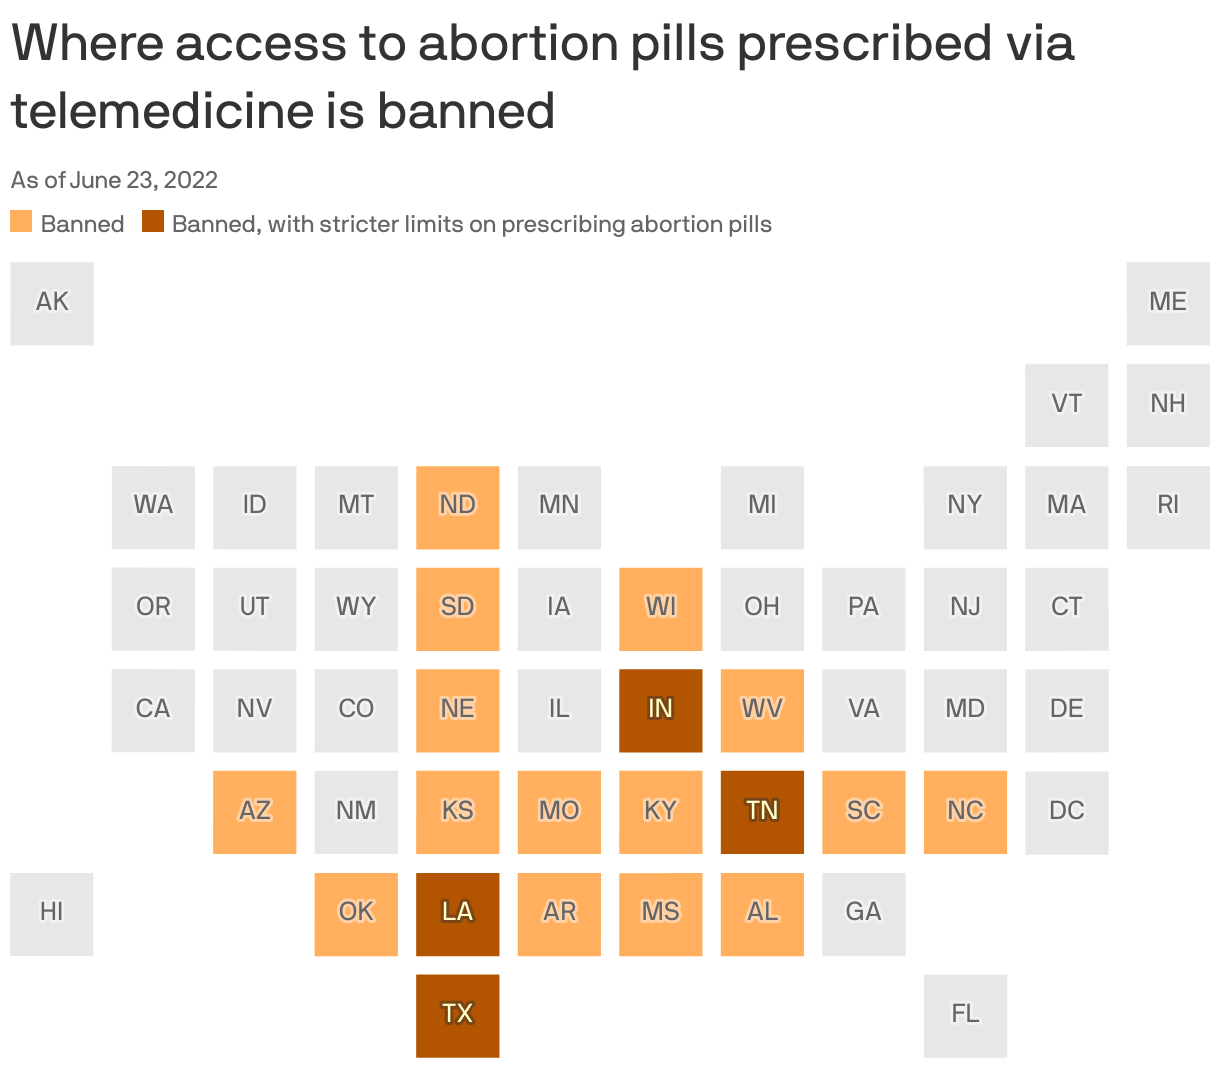 Where access to abortion pills prescribed via telemedicine is banned